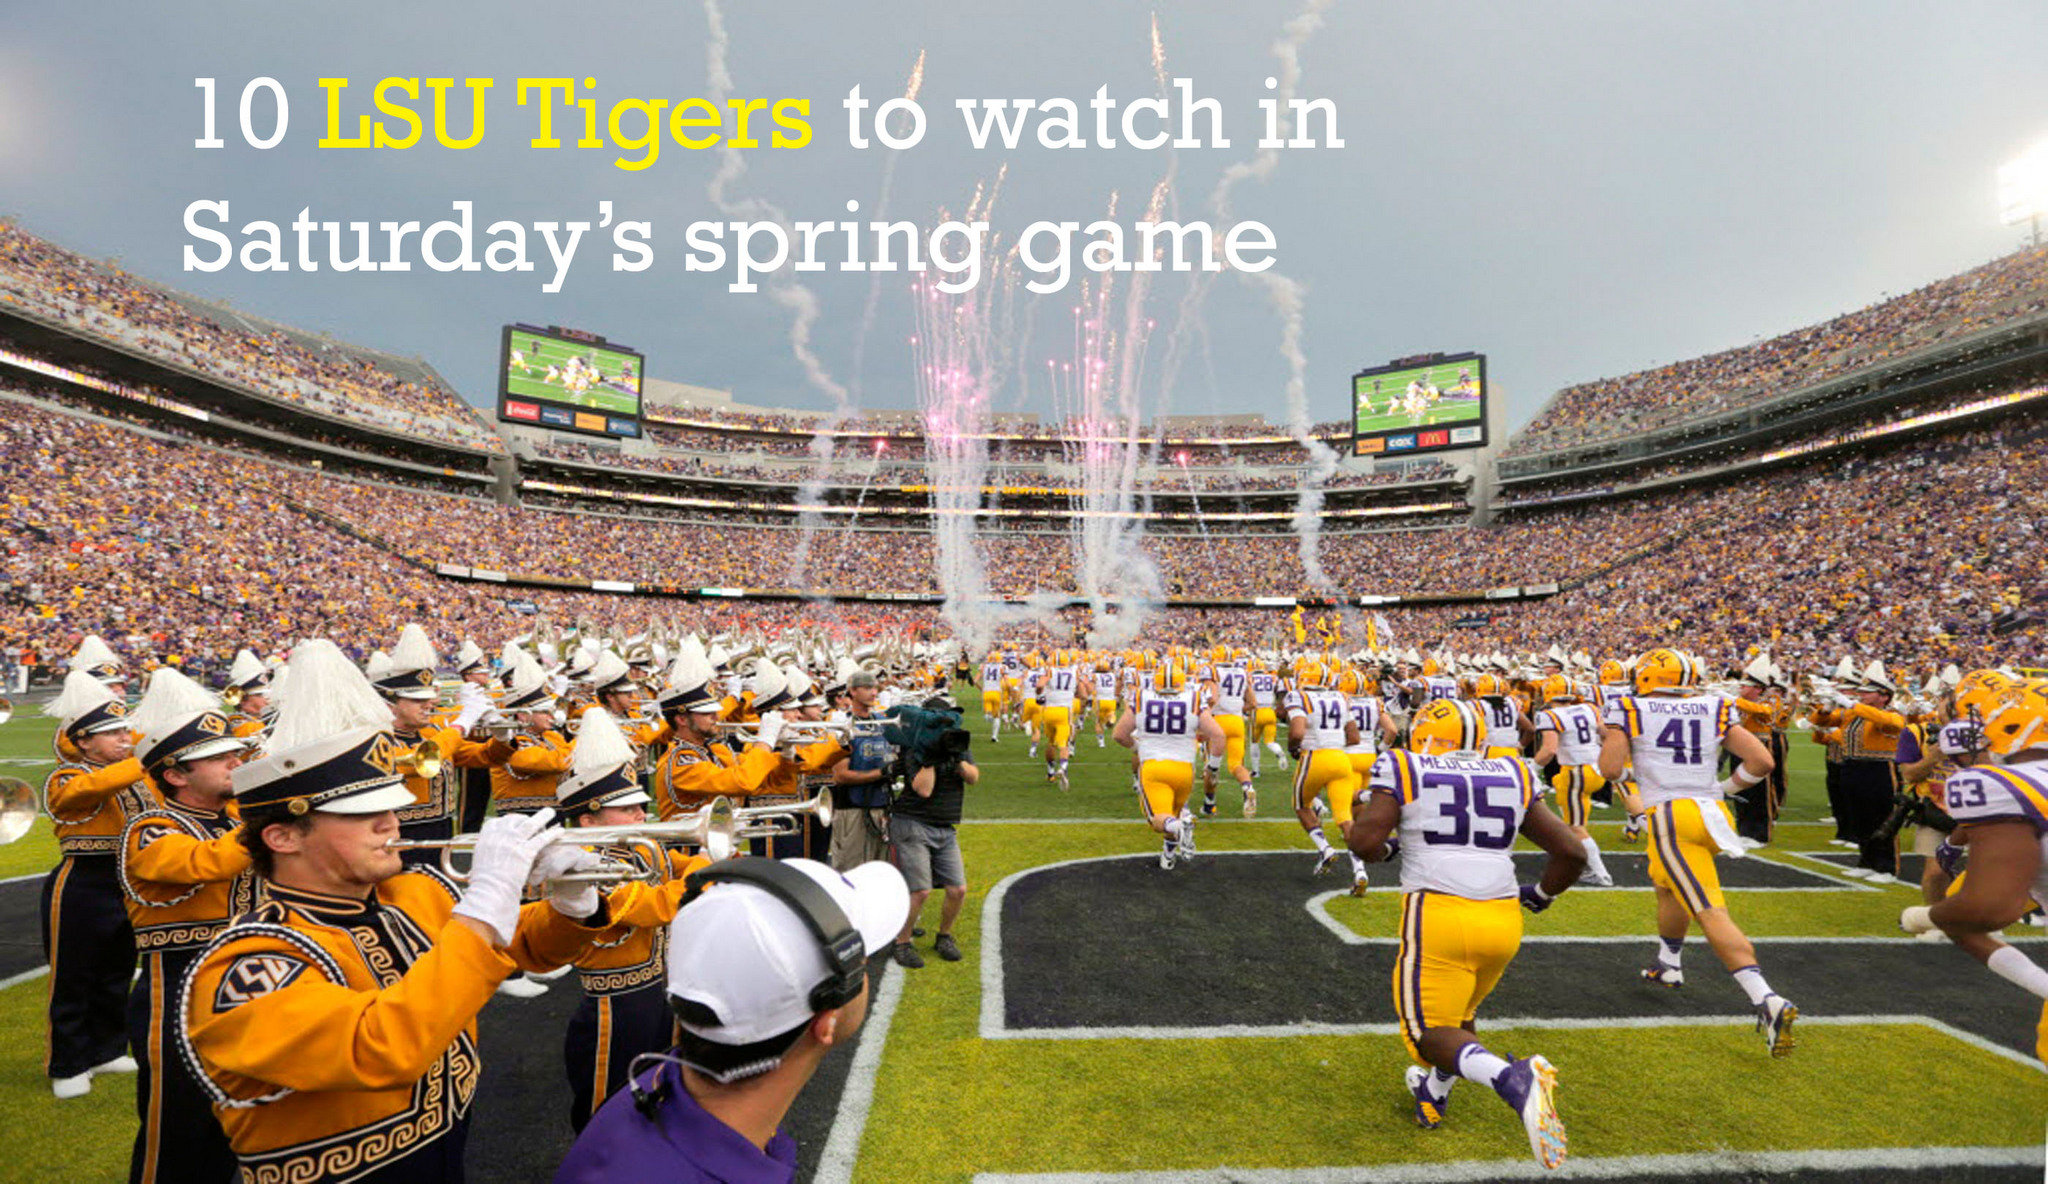 Lsu Tigers To Watch In Saturday S Spring Football Game Nola